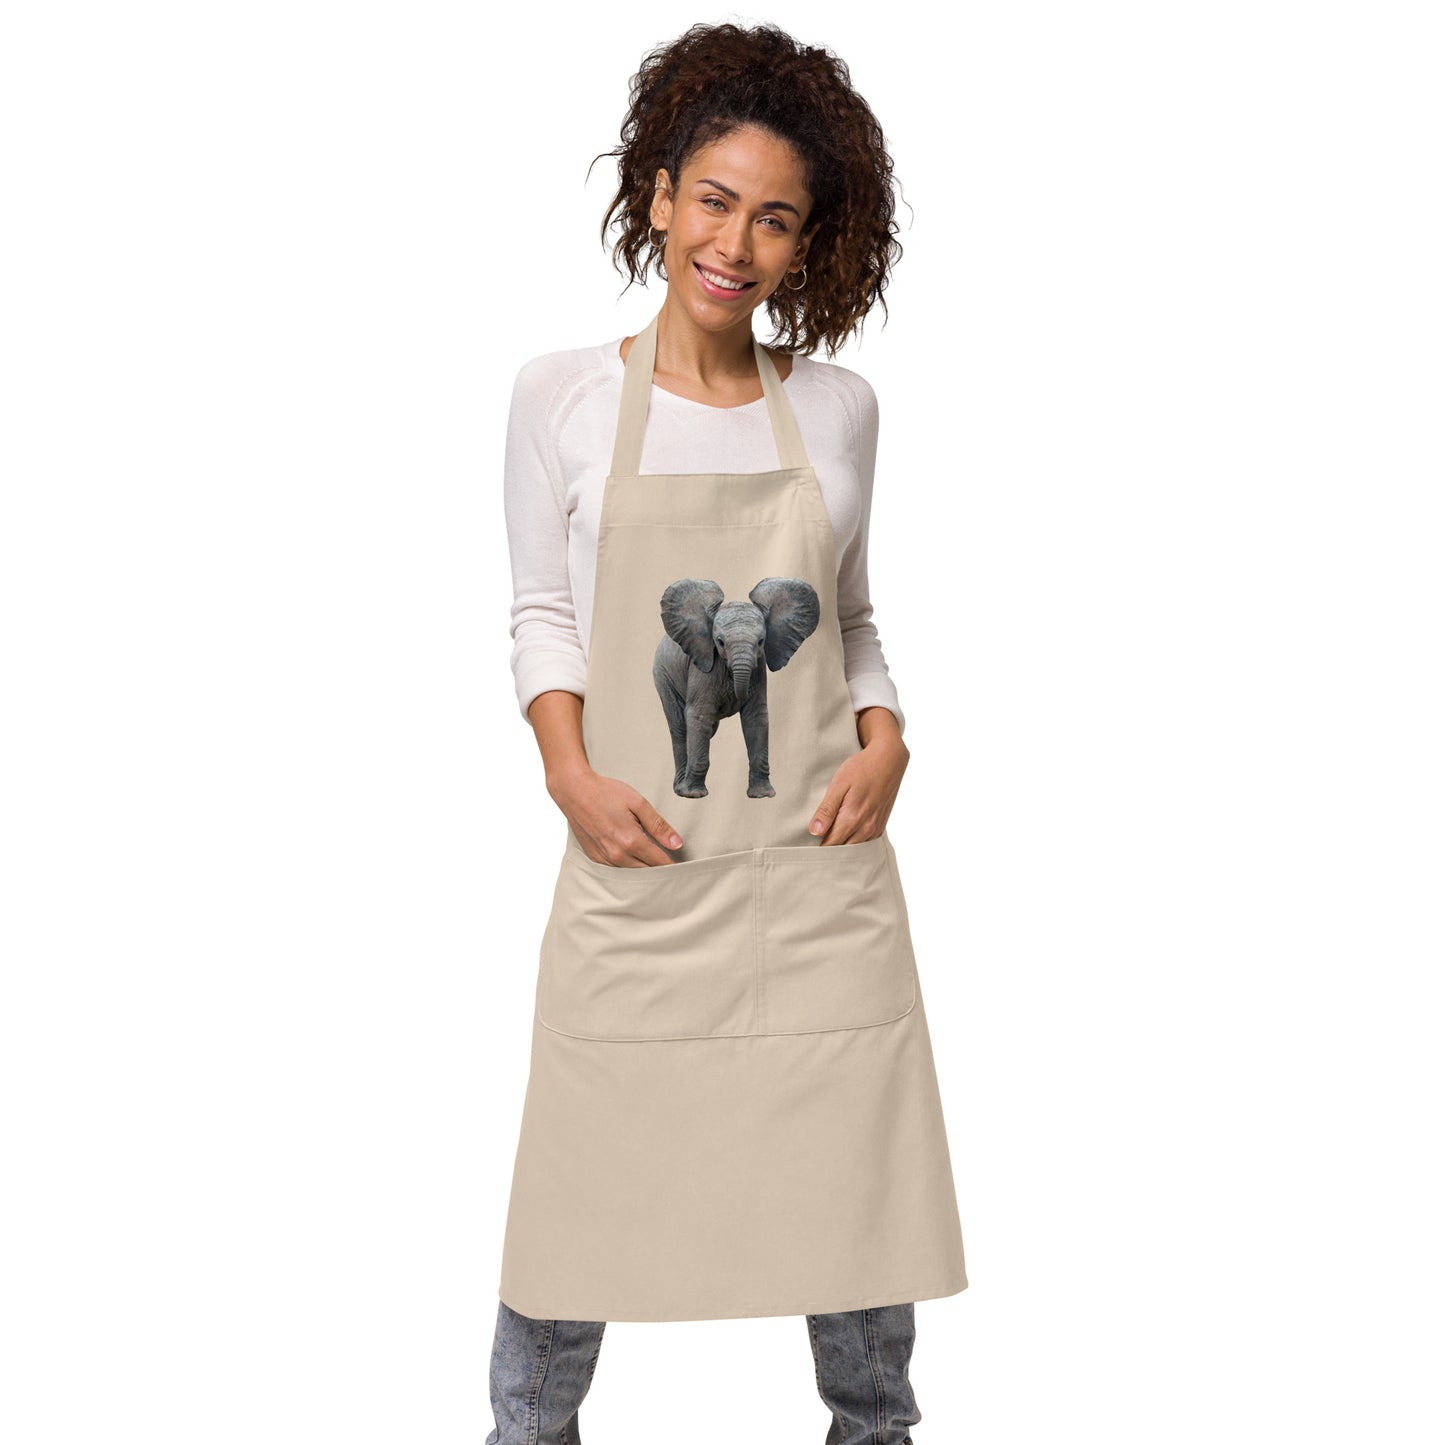 Organic Cotton Apron Printed with a Baby Elephant.